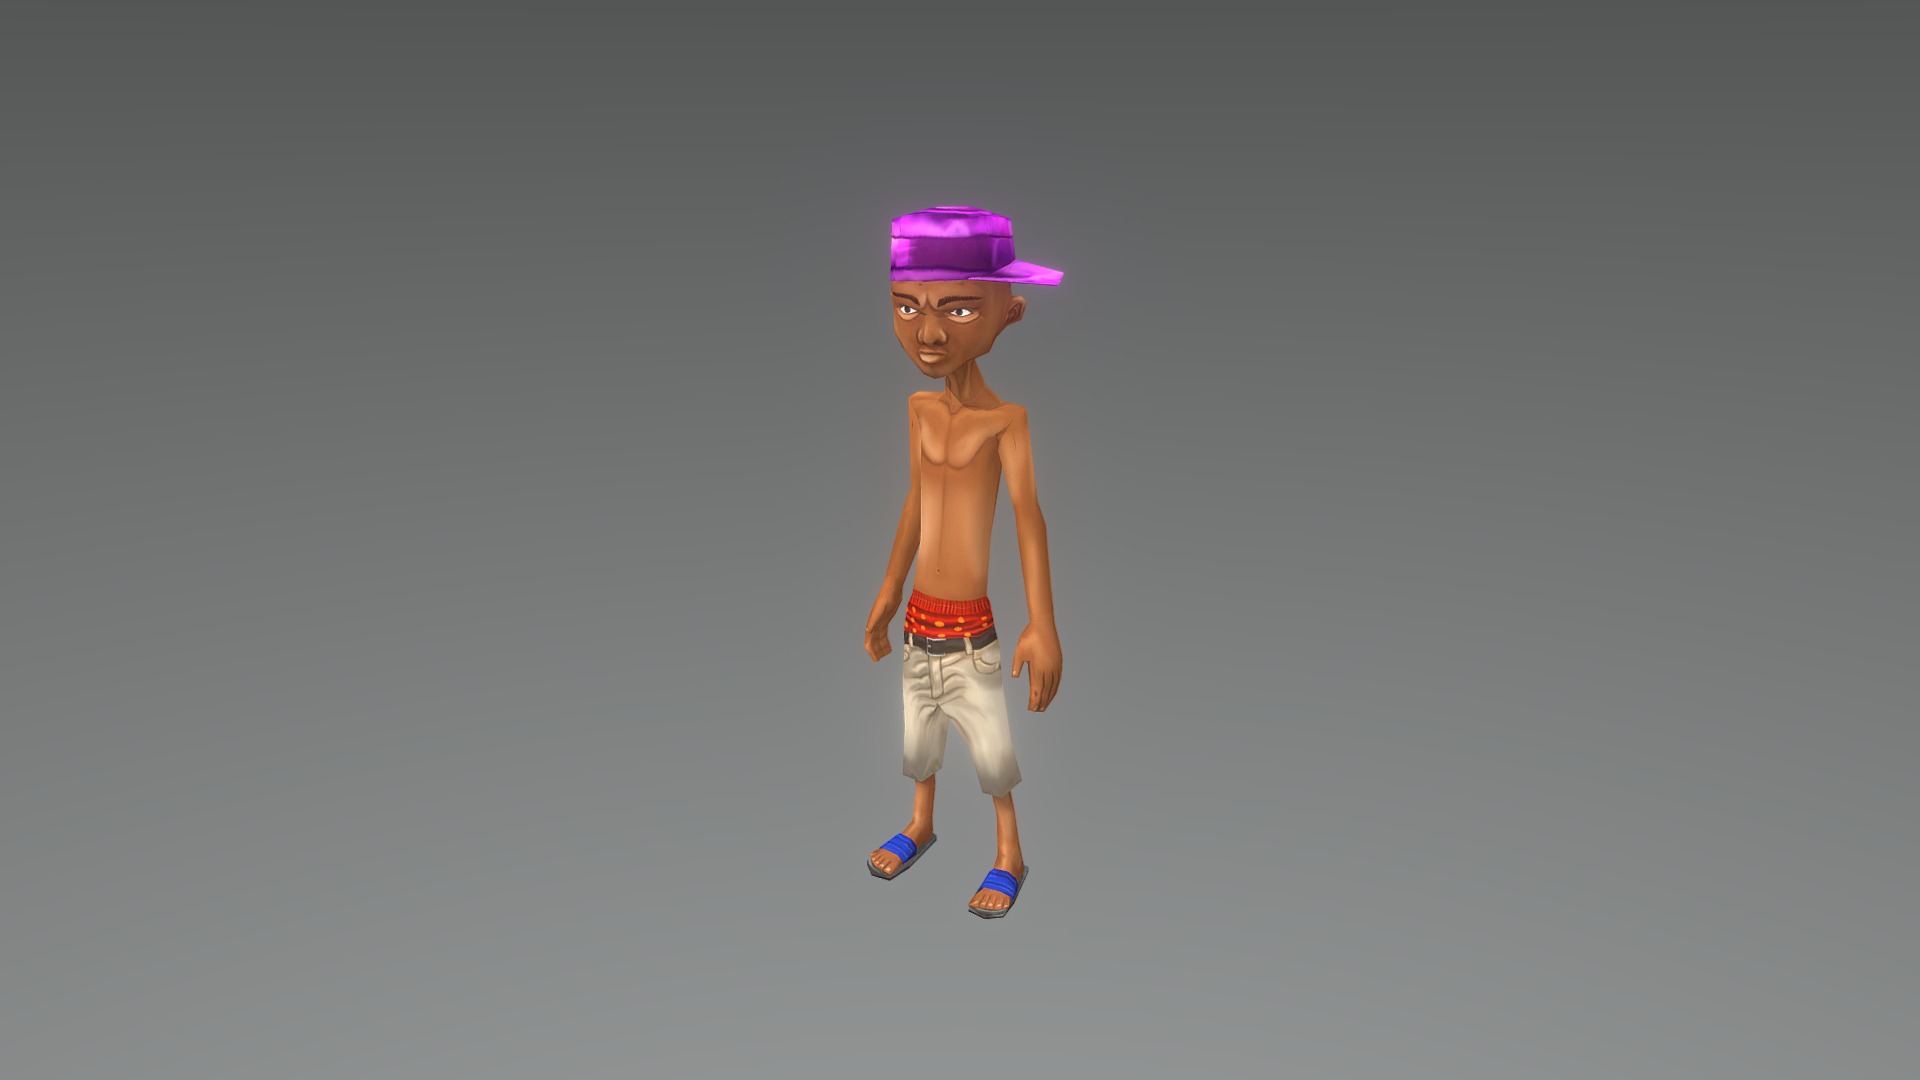 3D model ASSALTANTE-1 - This is a 3D model of the ASSALTANTE-1. The 3D model is about a toy figurine of a boy wearing a hat and a pink shirt.